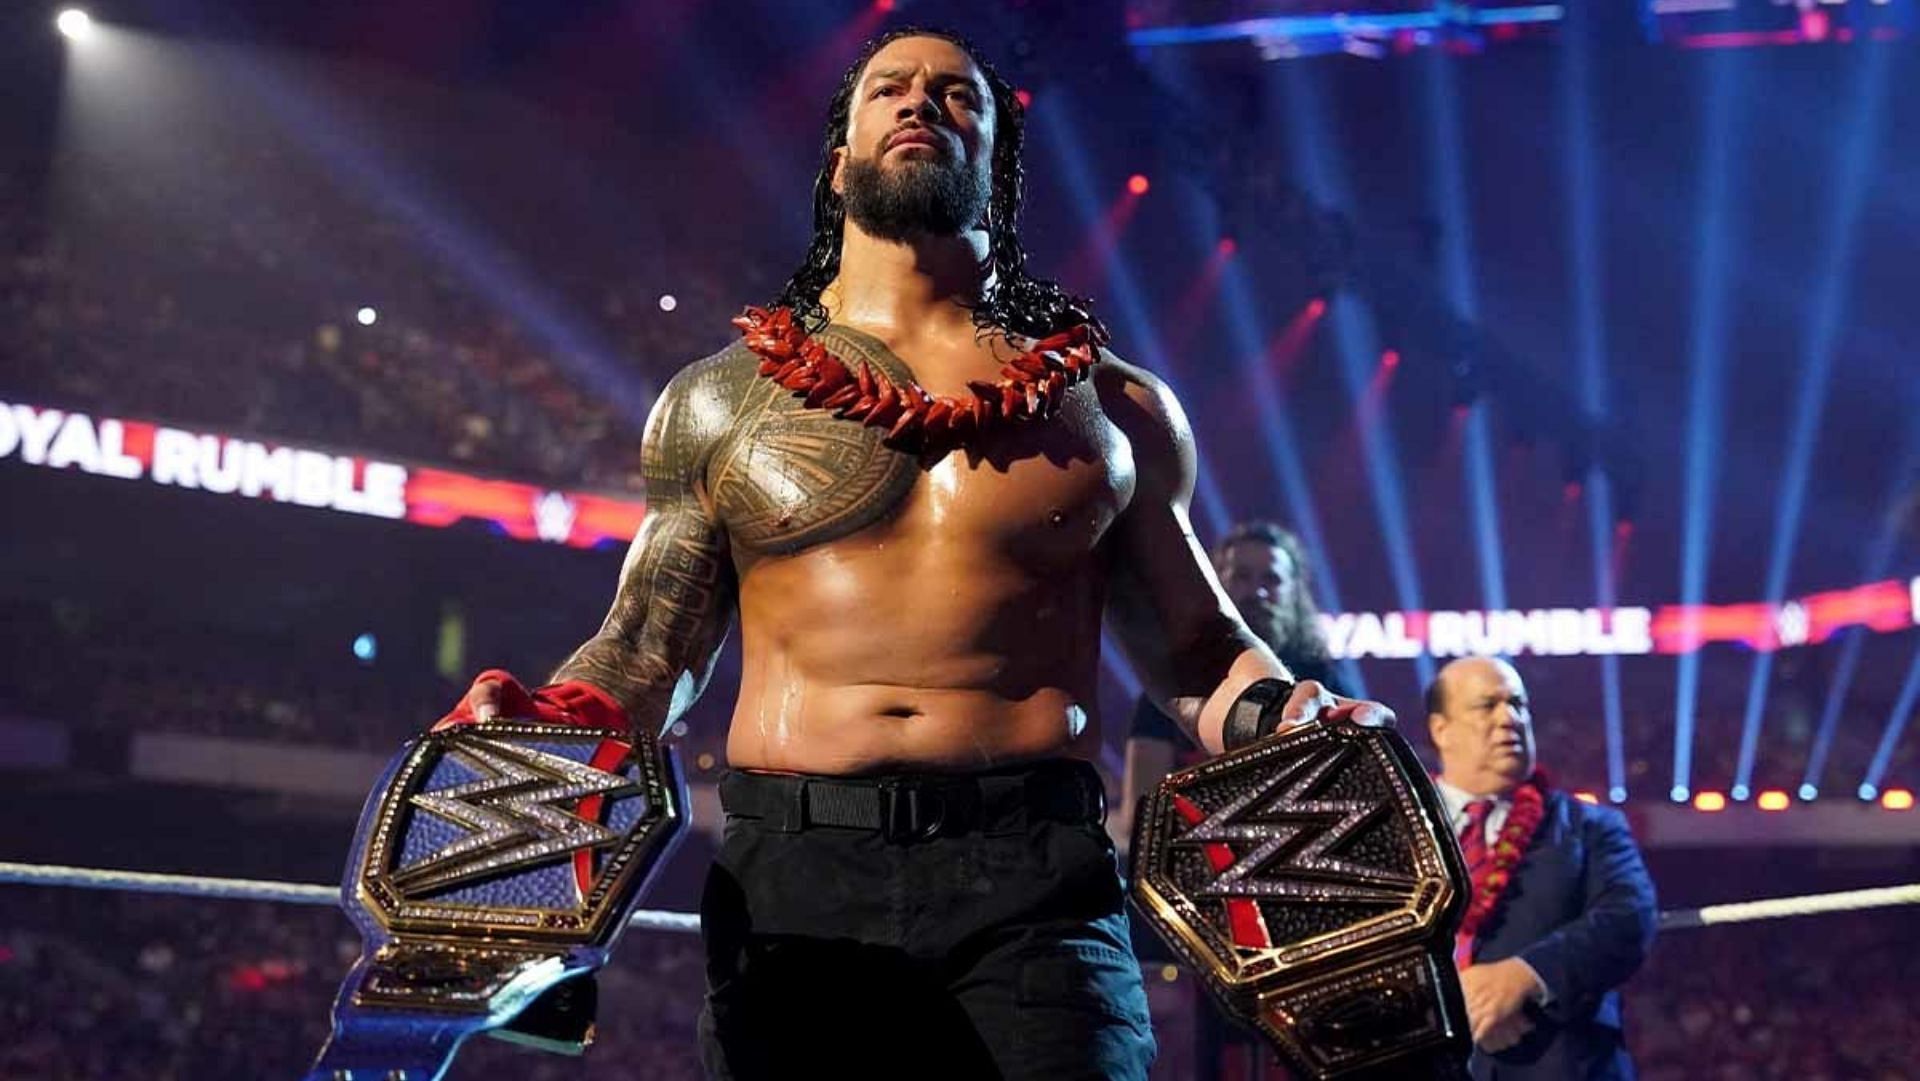 Who did Roman Reigns beat to win the WWE and Universal Championships?